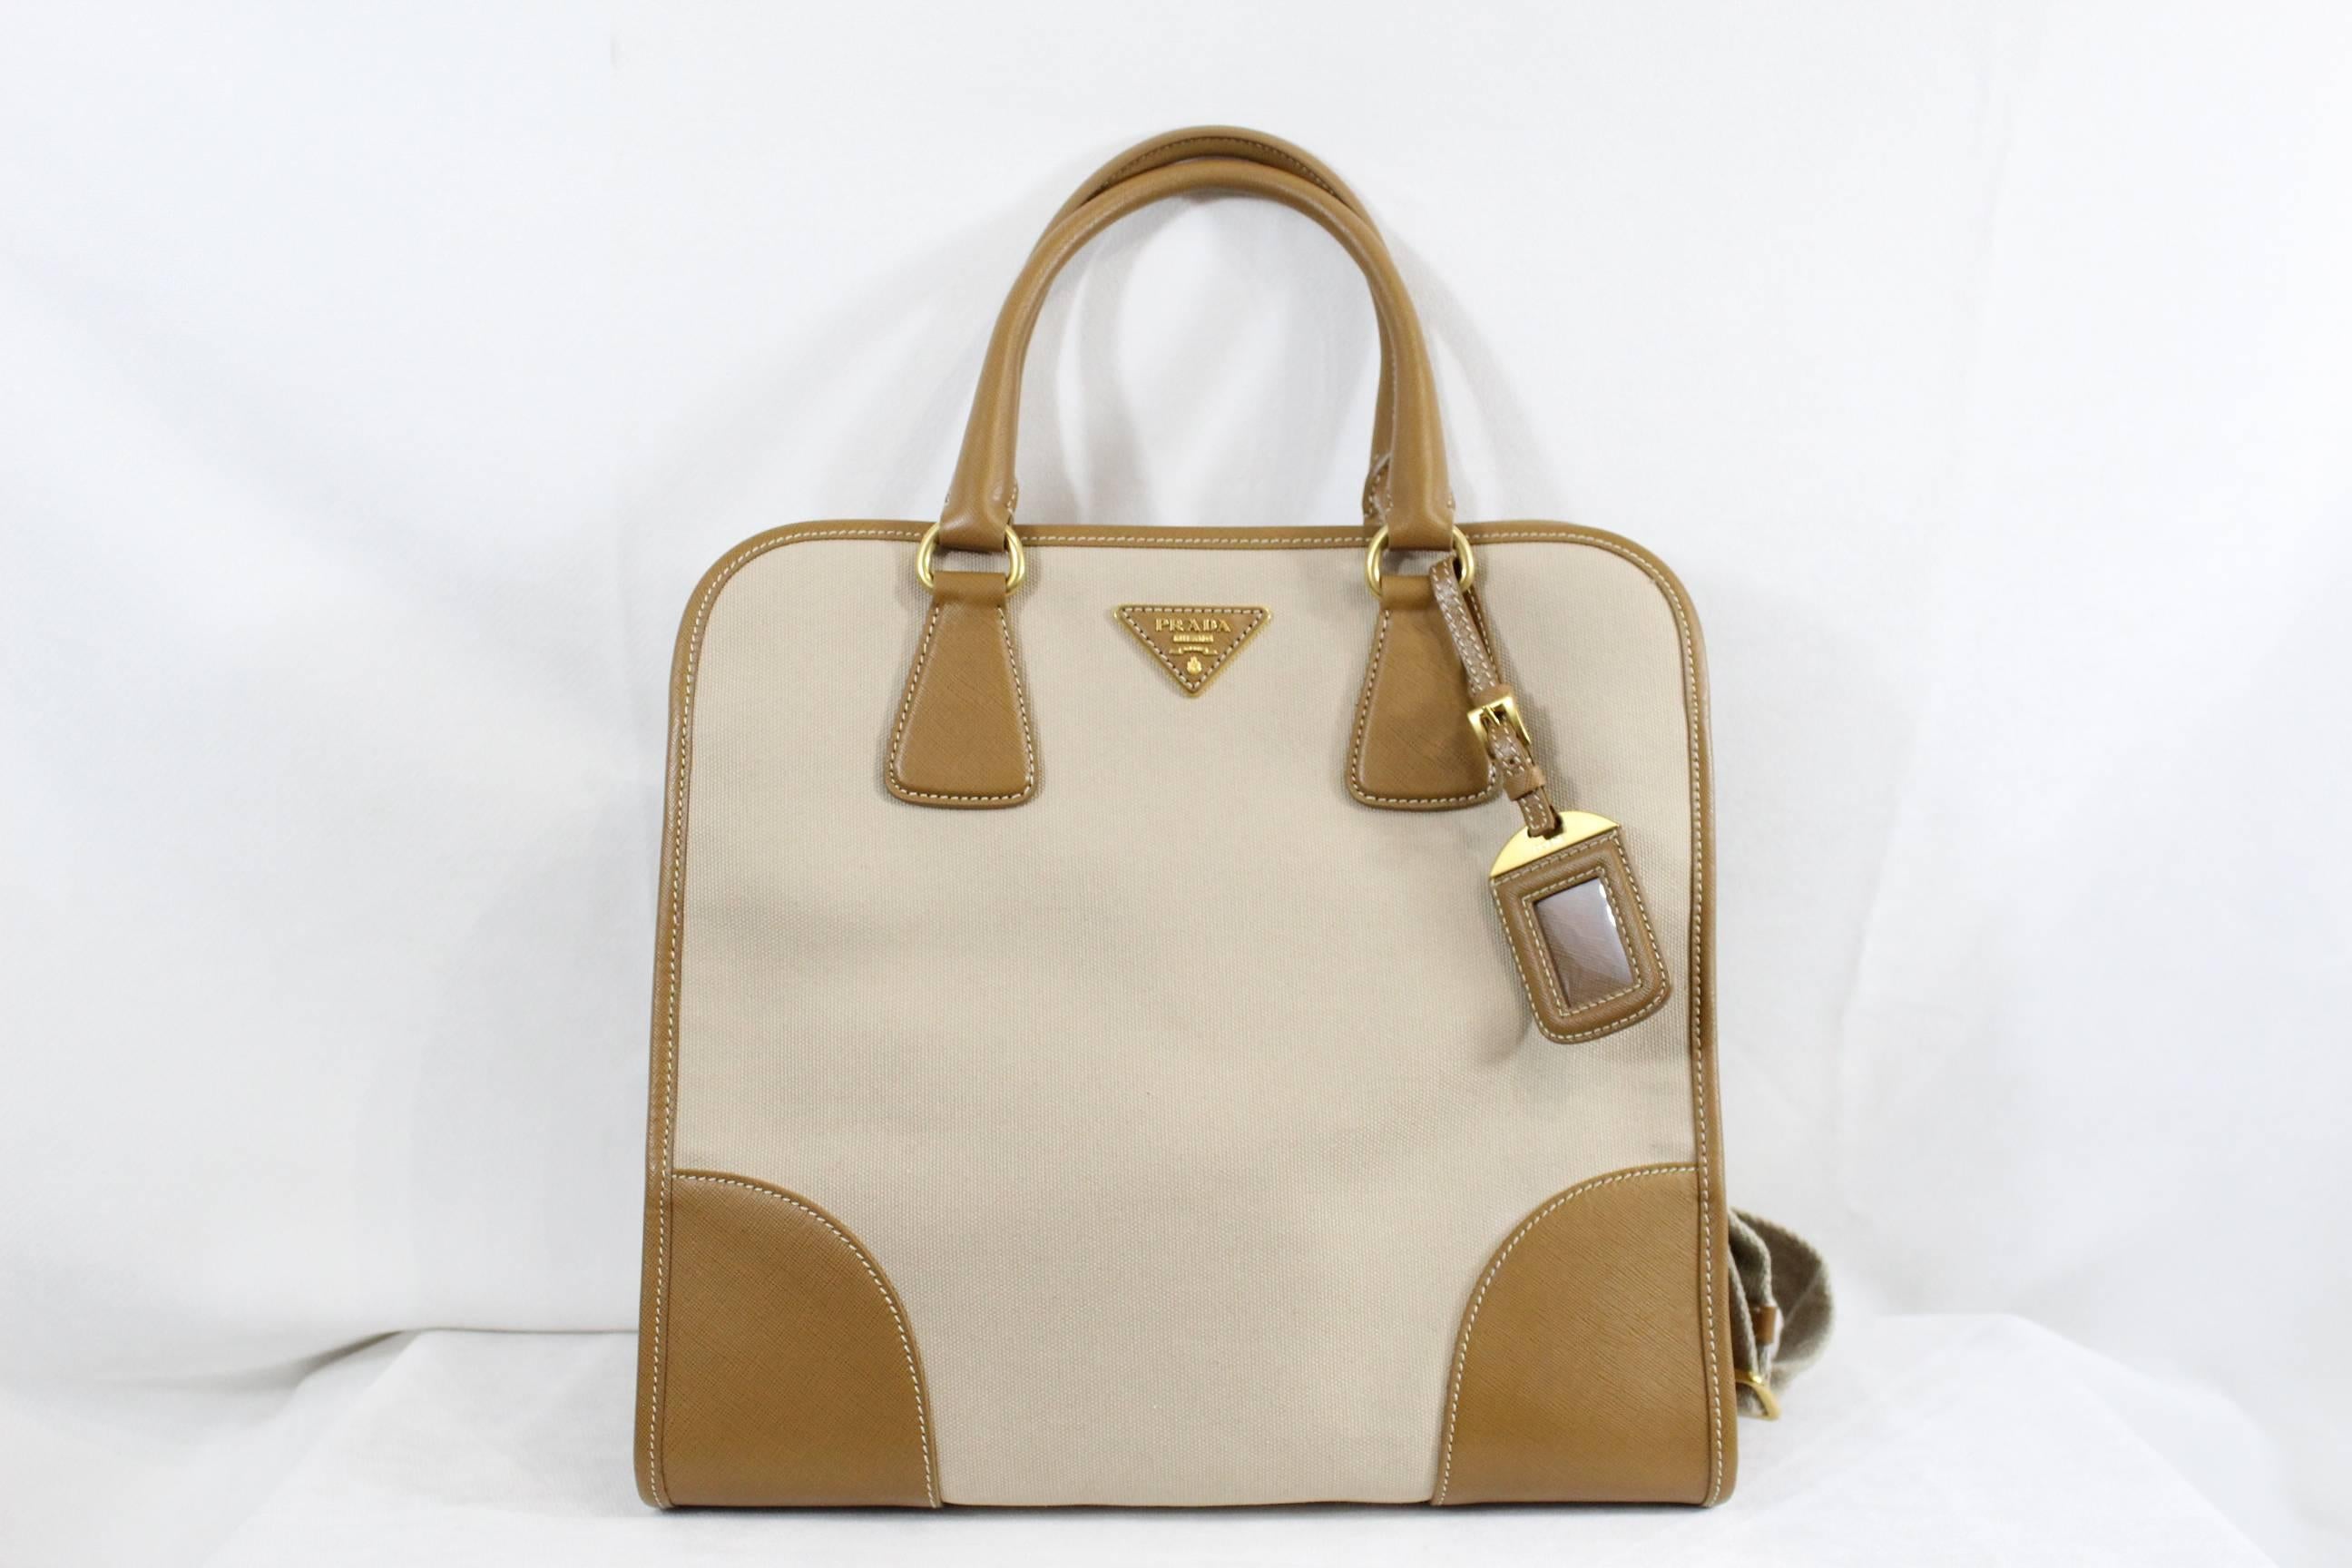 Really nice Prada bag in canvas and safiano brown leather.

Bag hardly used.No signs of wear.

Removable strap.

